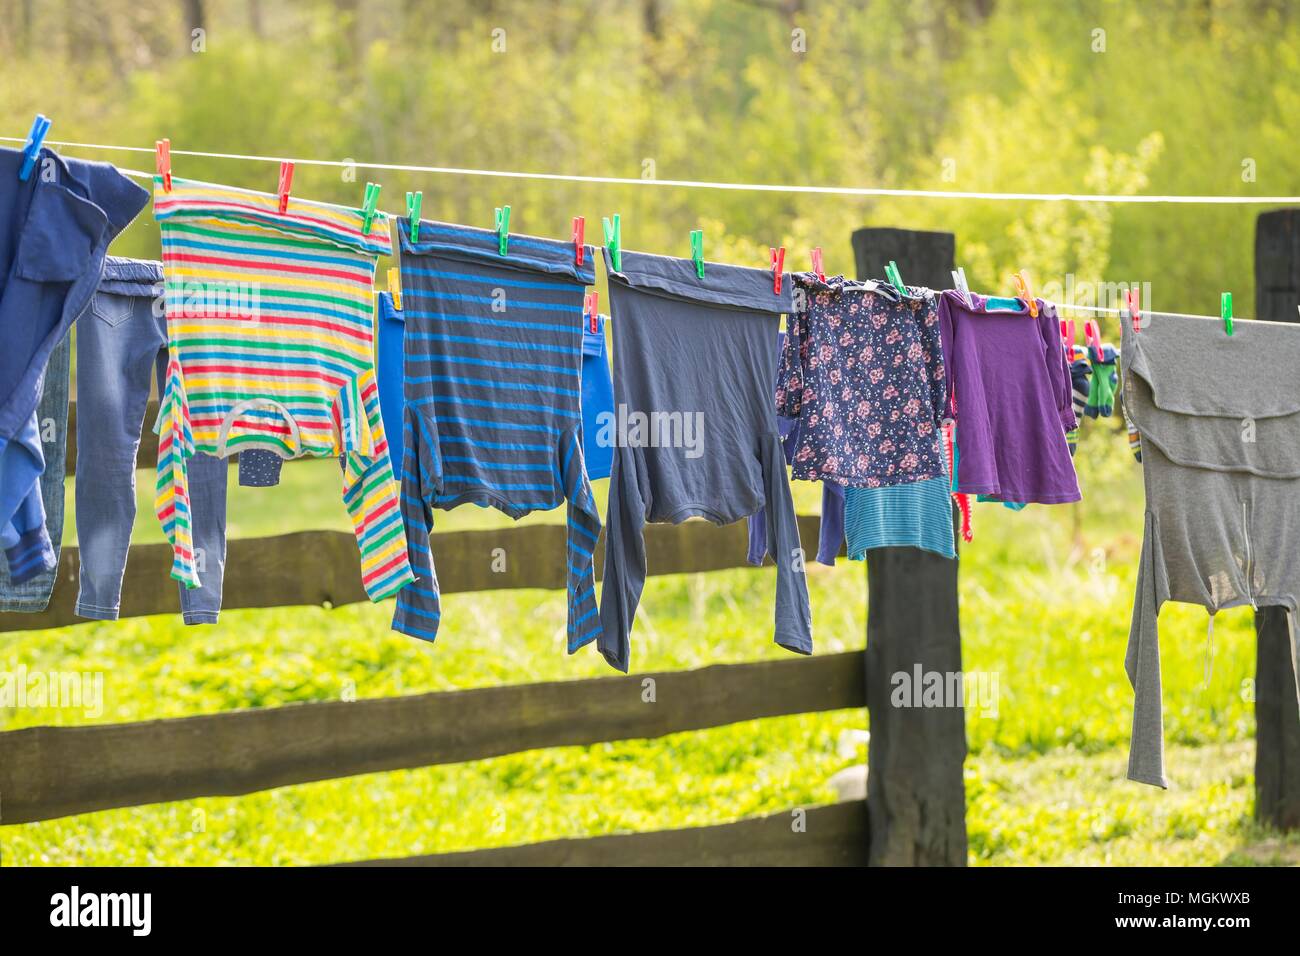 Washing line with drying clothes in outdoor. Clothes hanging on